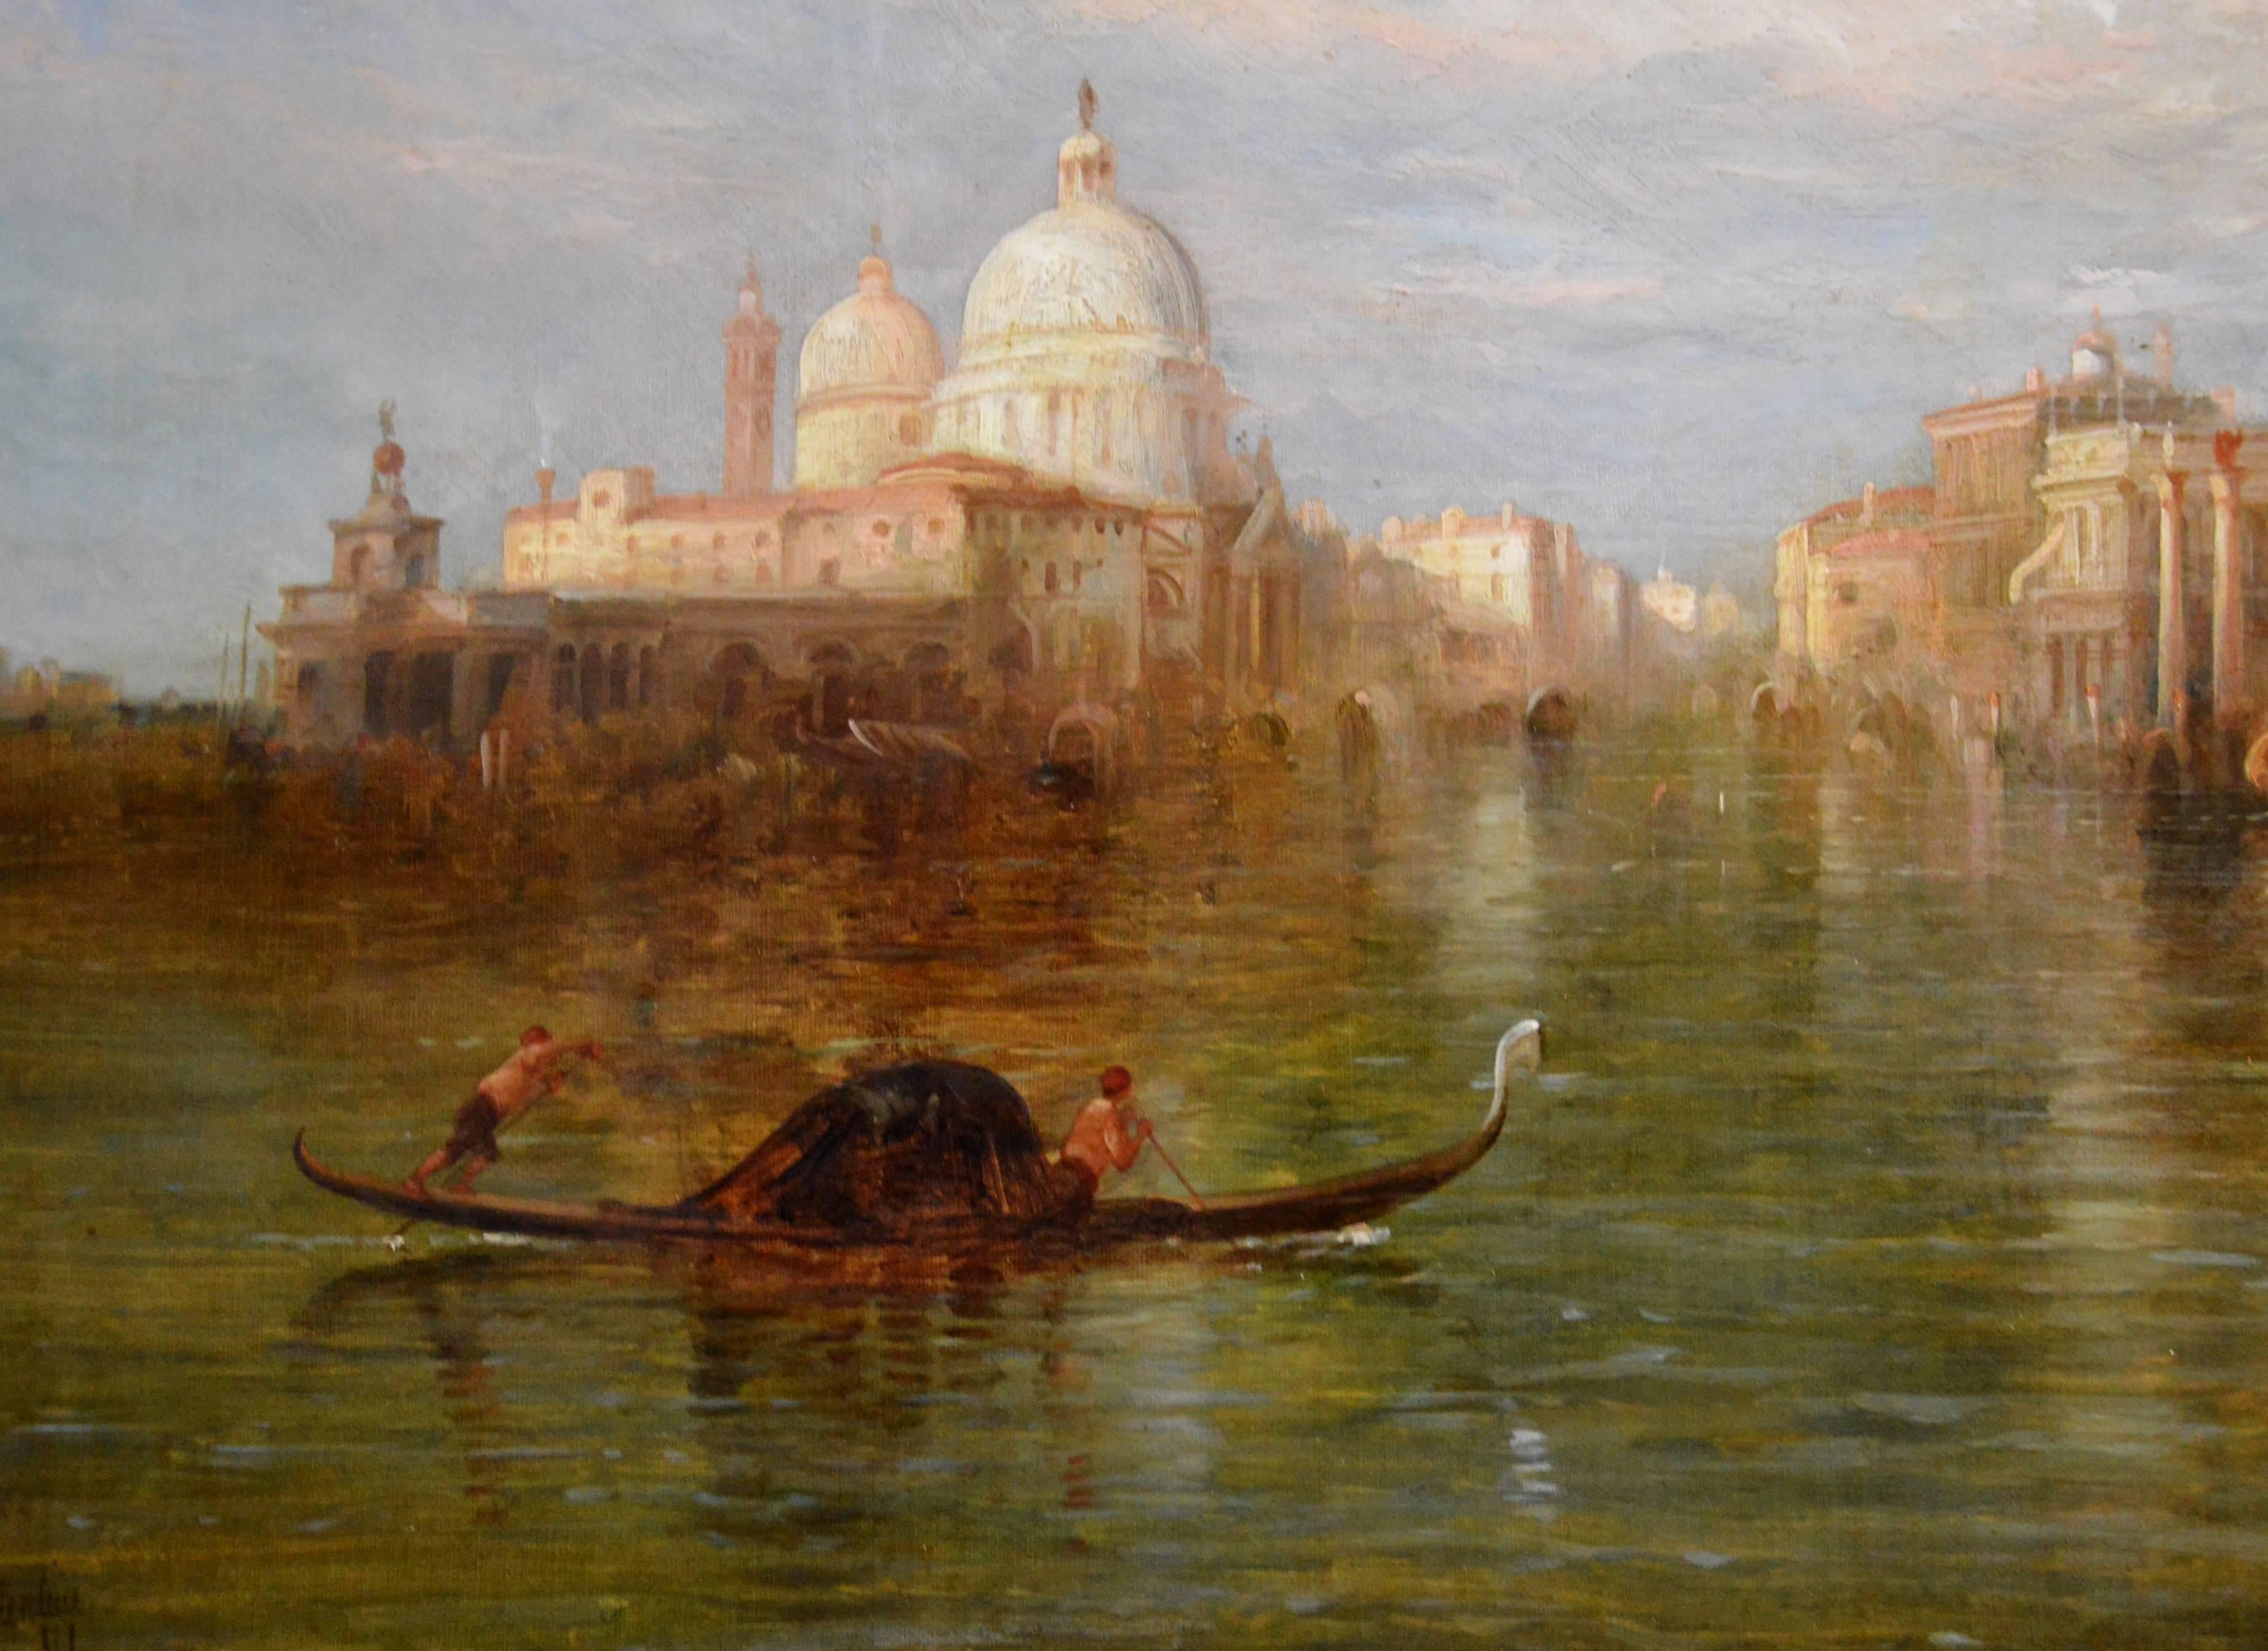 The Grand Canal - Venice - 19th Century Oil Painting - Alfred Pollentine 4